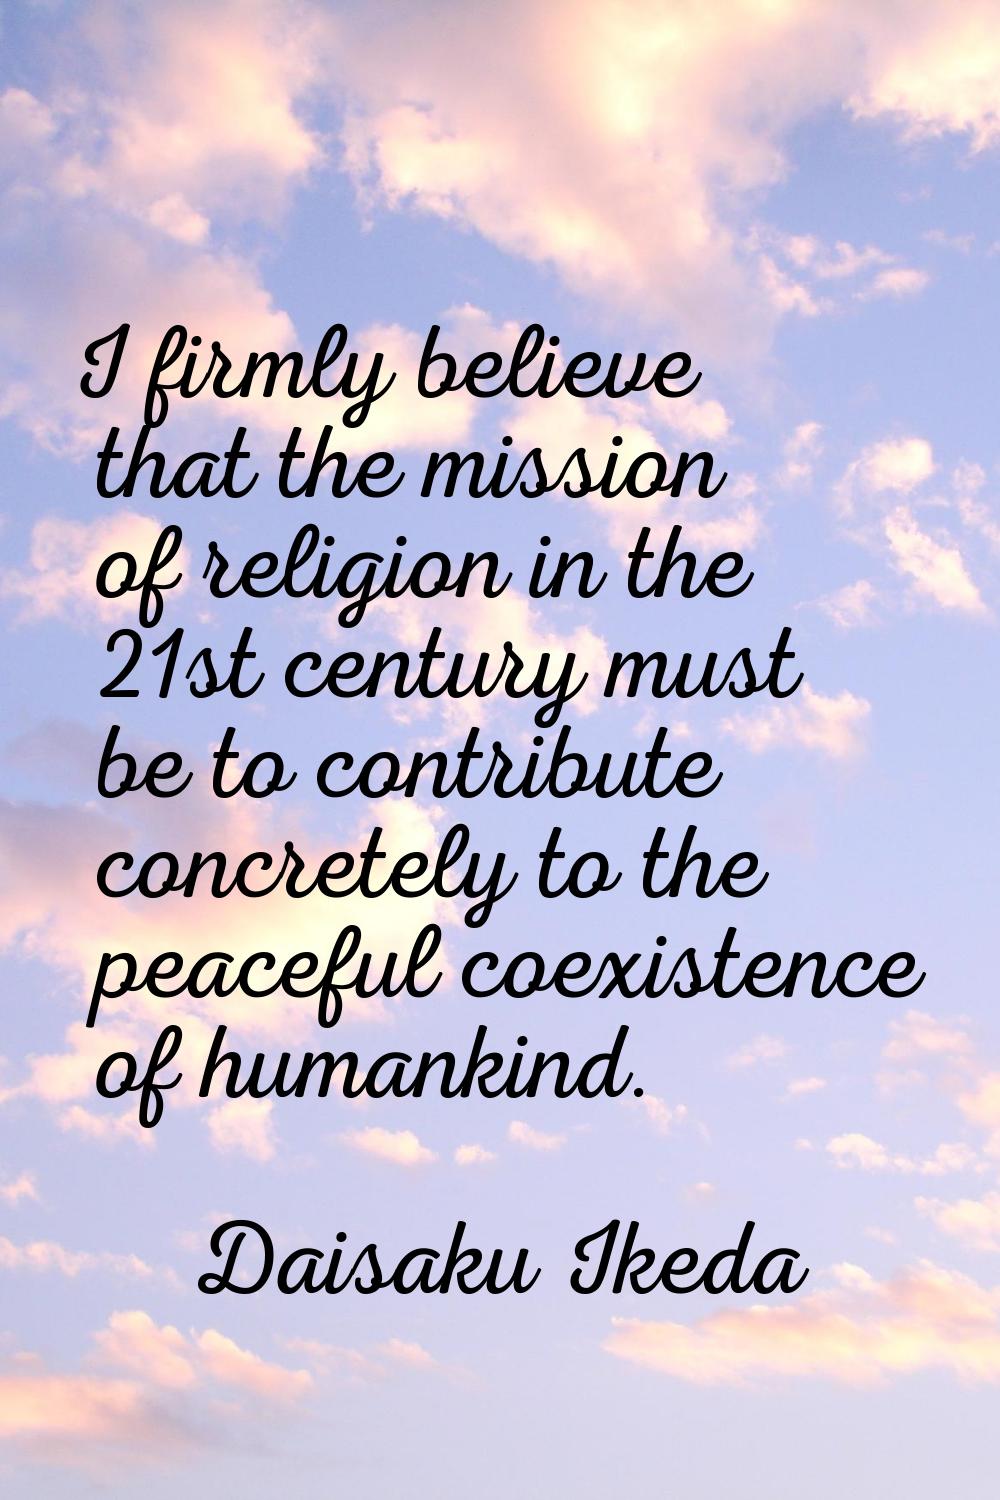 I firmly believe that the mission of religion in the 21st century must be to contribute concretely 